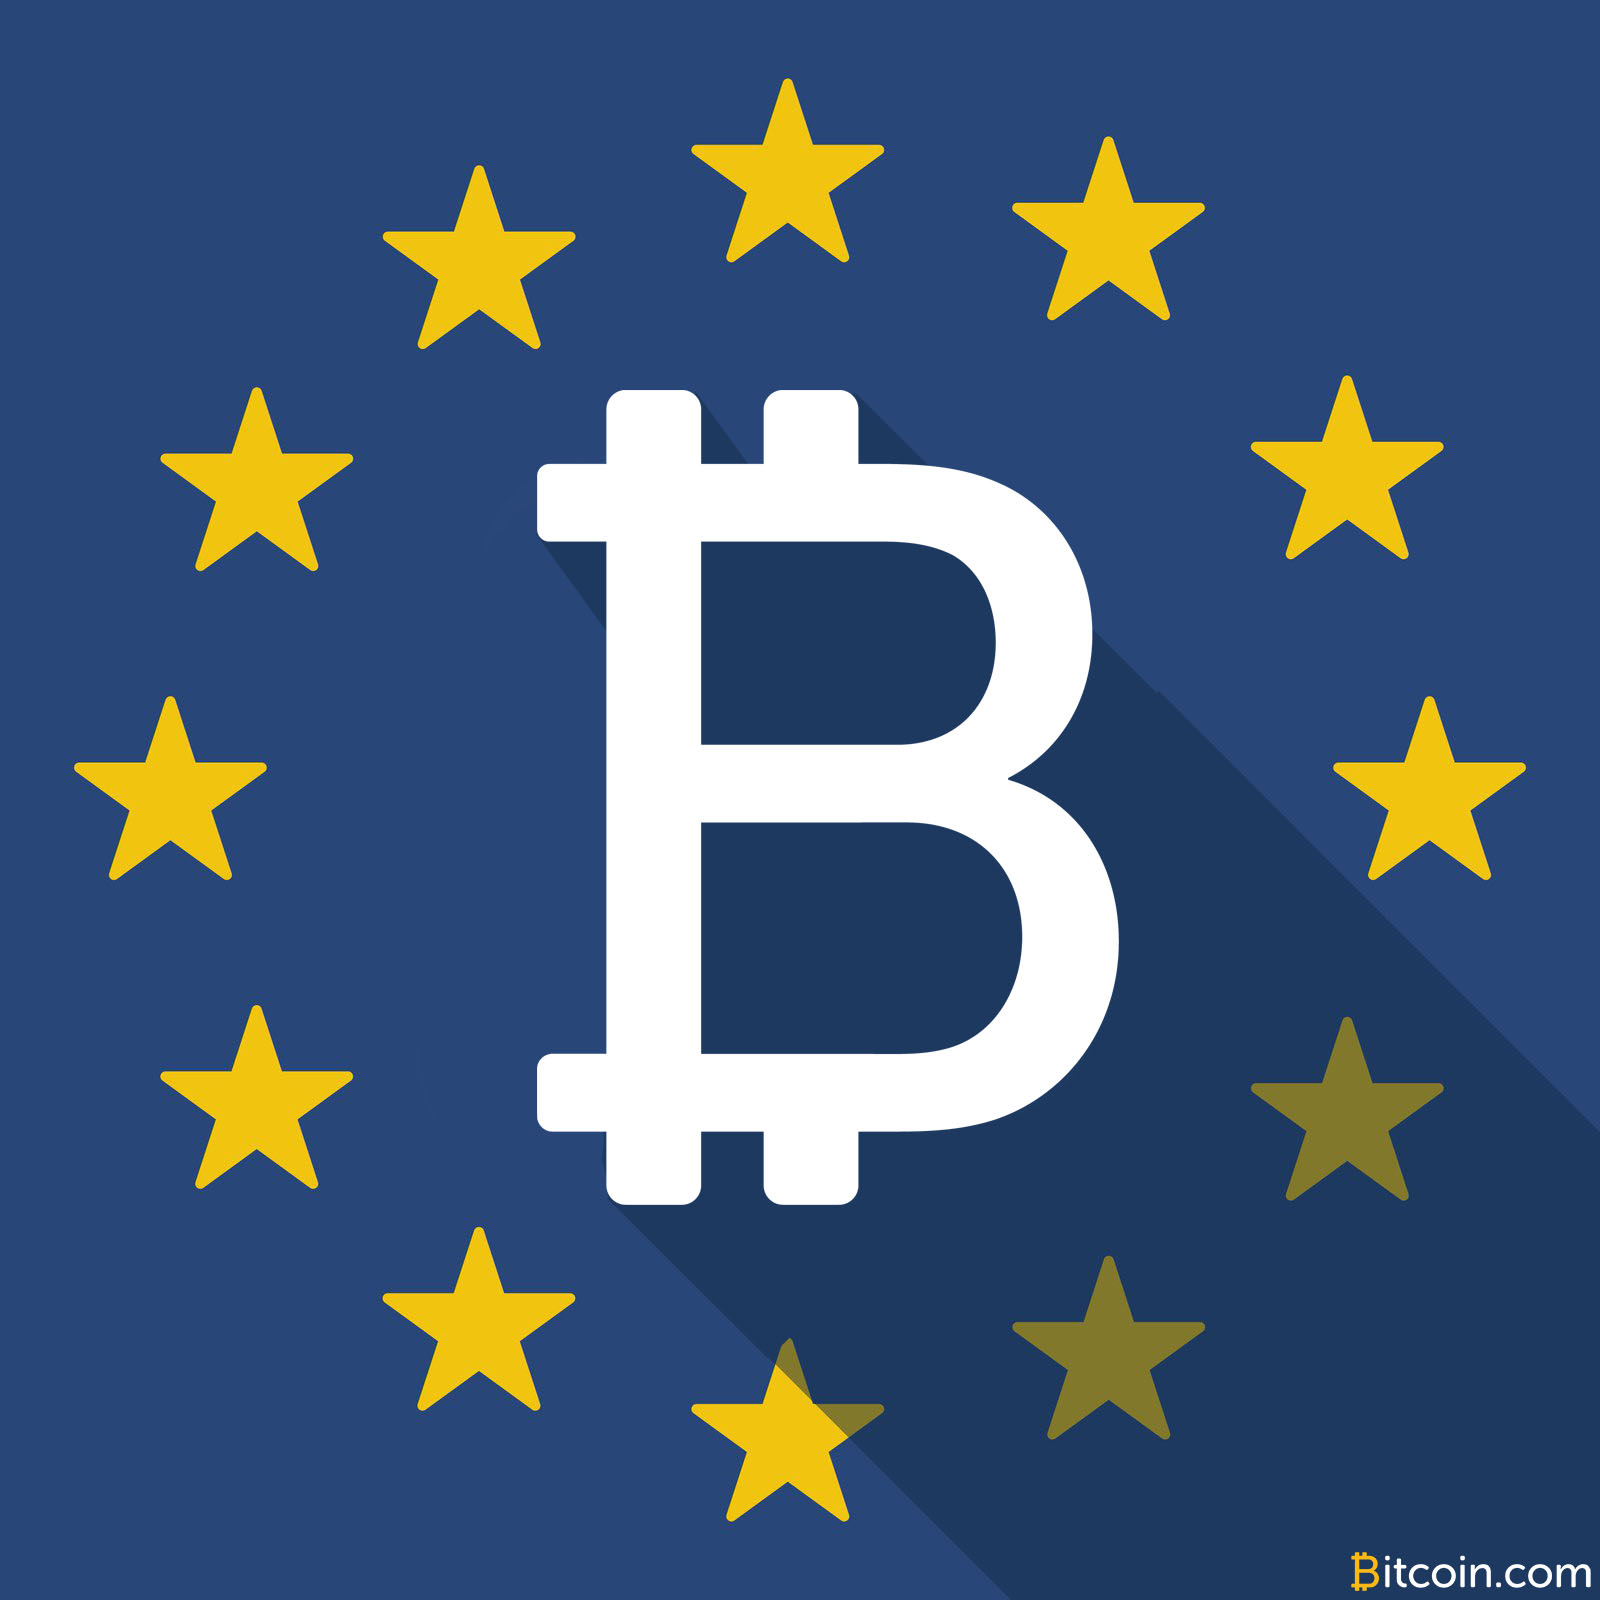 President of European Central Bank: “Not Within Our Power to Prohibit or Regulate Bitcoin”